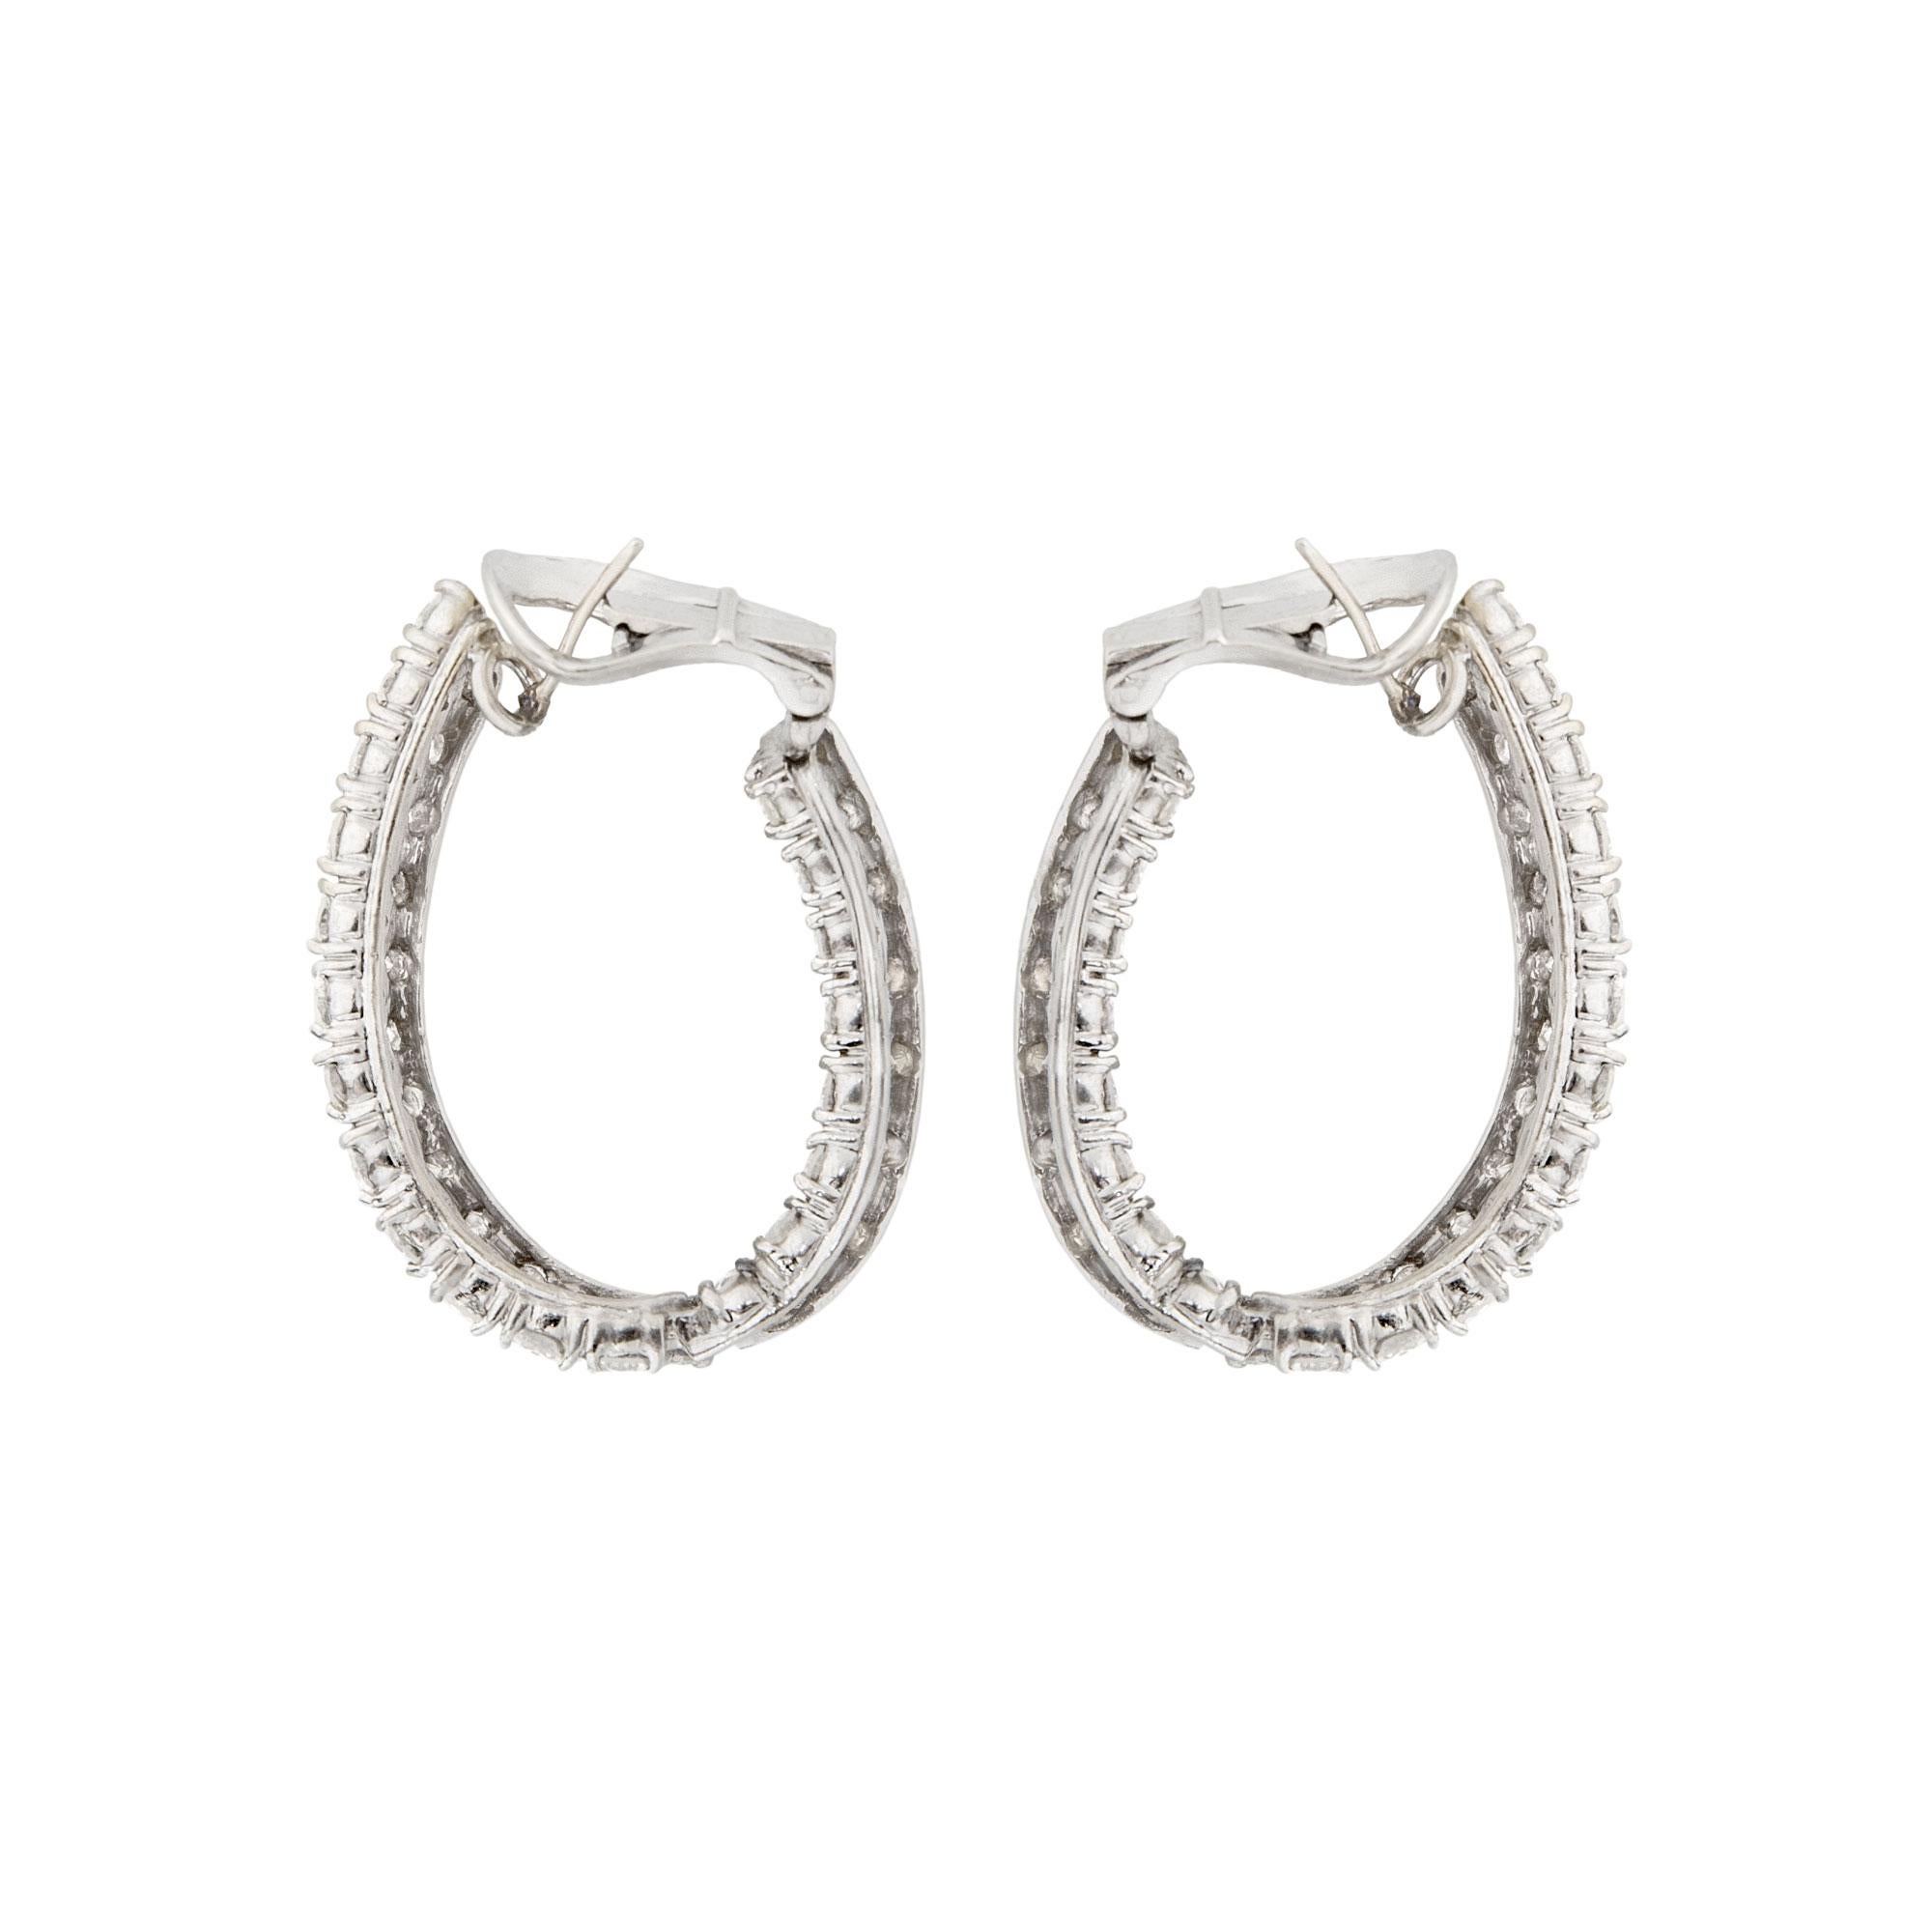 The best kind of hoops!

These elongated hoop earrings are set “in and out” with double rows of brilliant-cut diamonds

1-1/2 inch in length
80 brilliant round cut diamonds total approximately 13.60 carats
18k white gold
Posts and omega clip backs